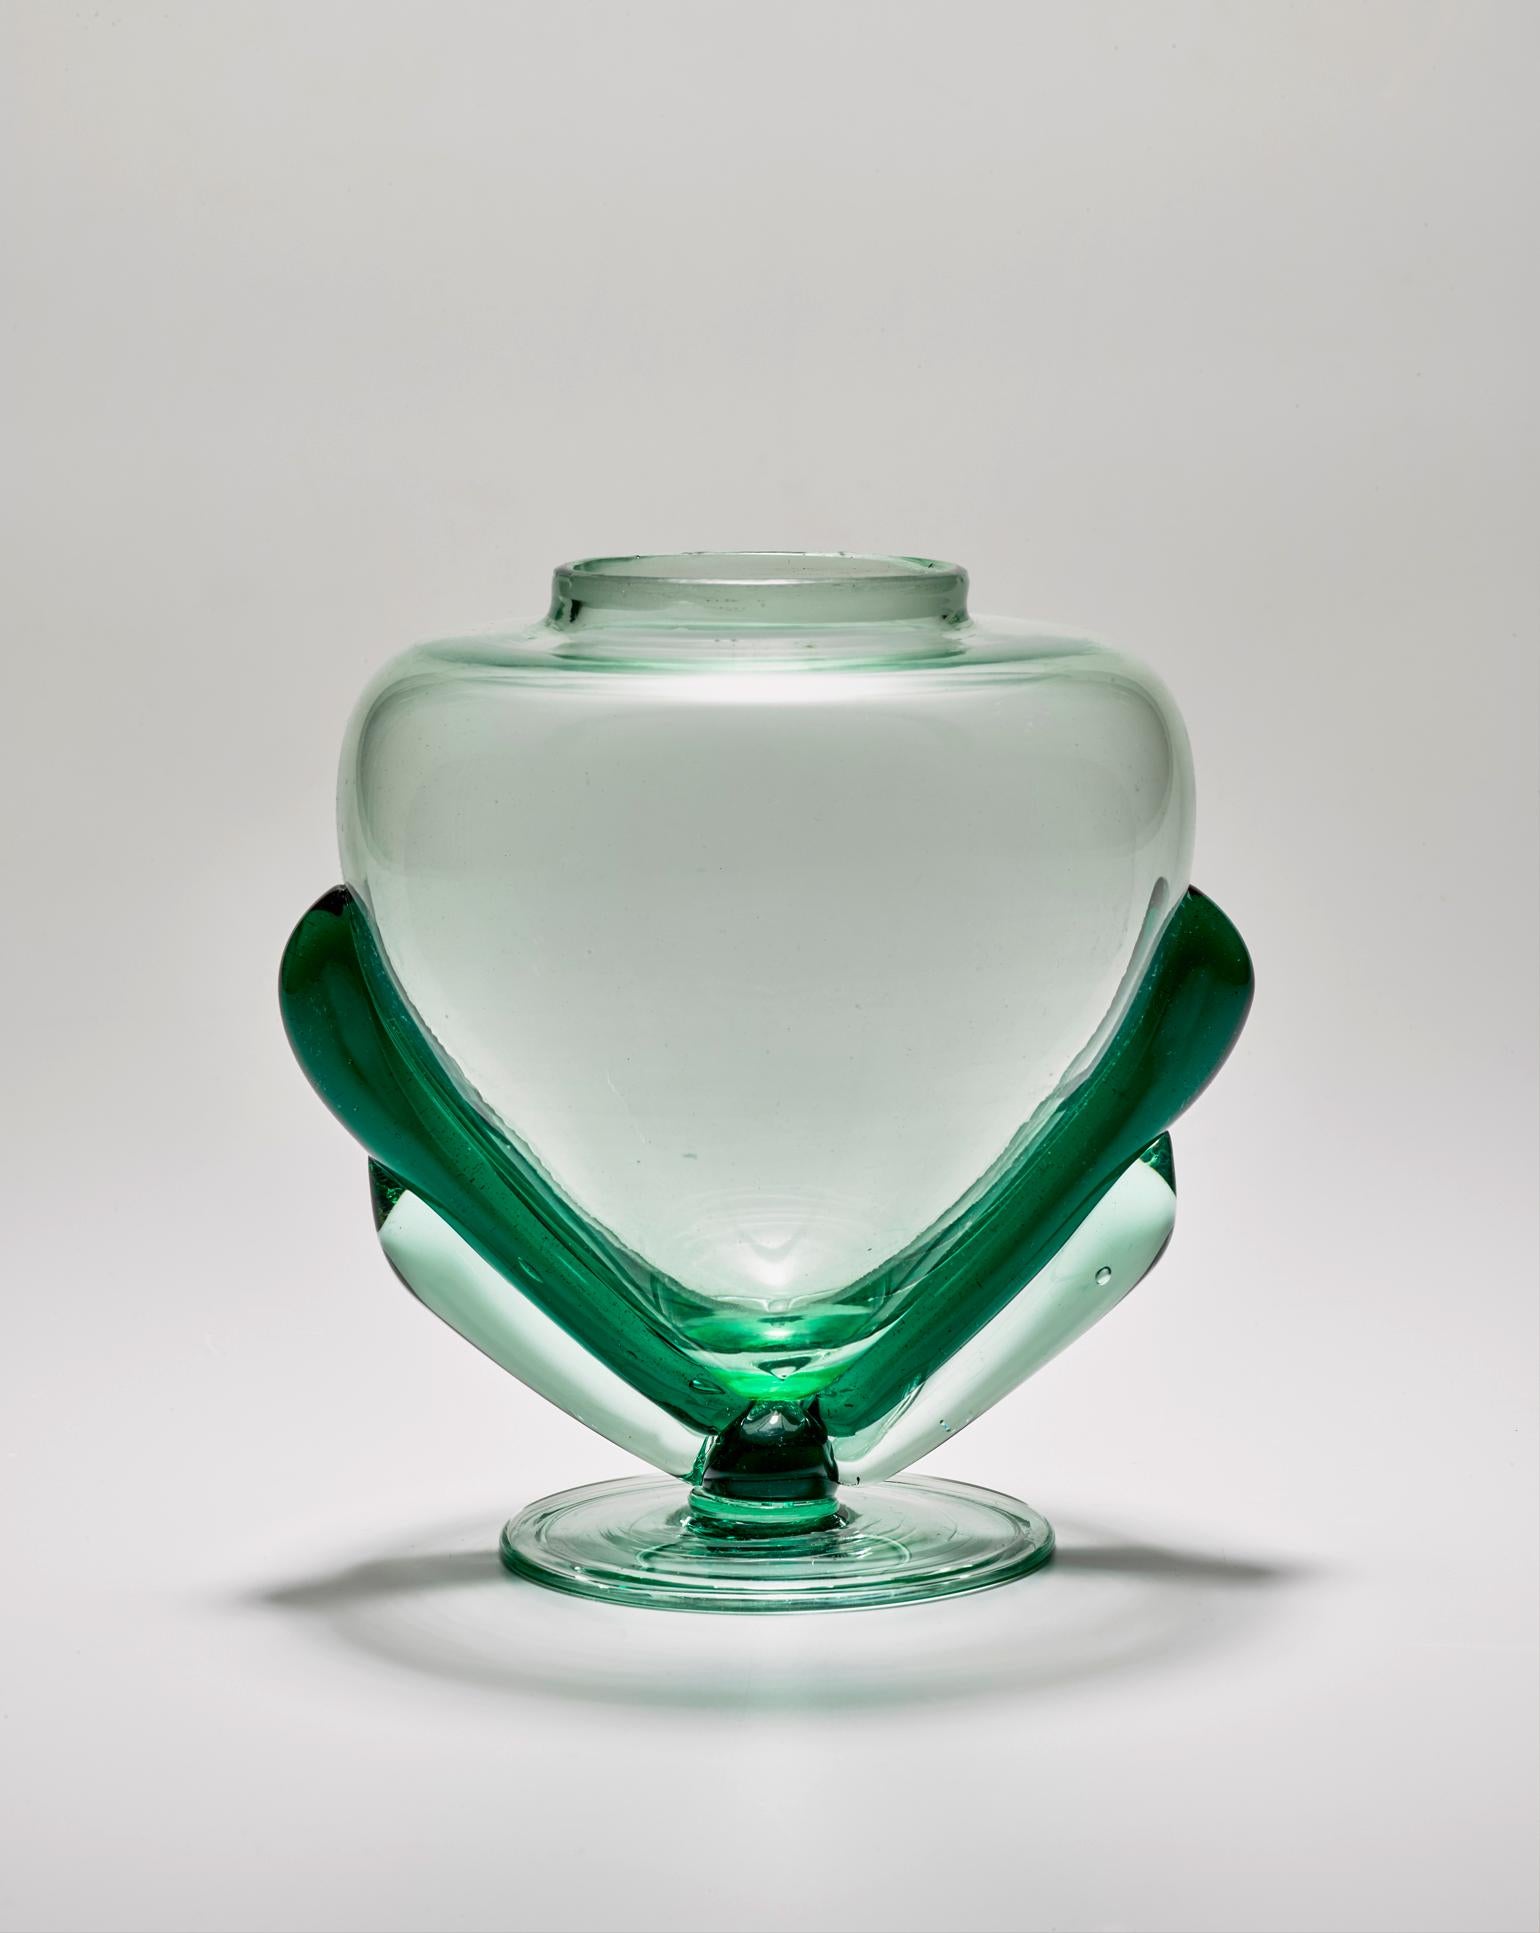 Perfume Bottleor Vase by Carlo Scarpa for MVM Cappellin 1920's In Excellent Condition For Sale In London, GB